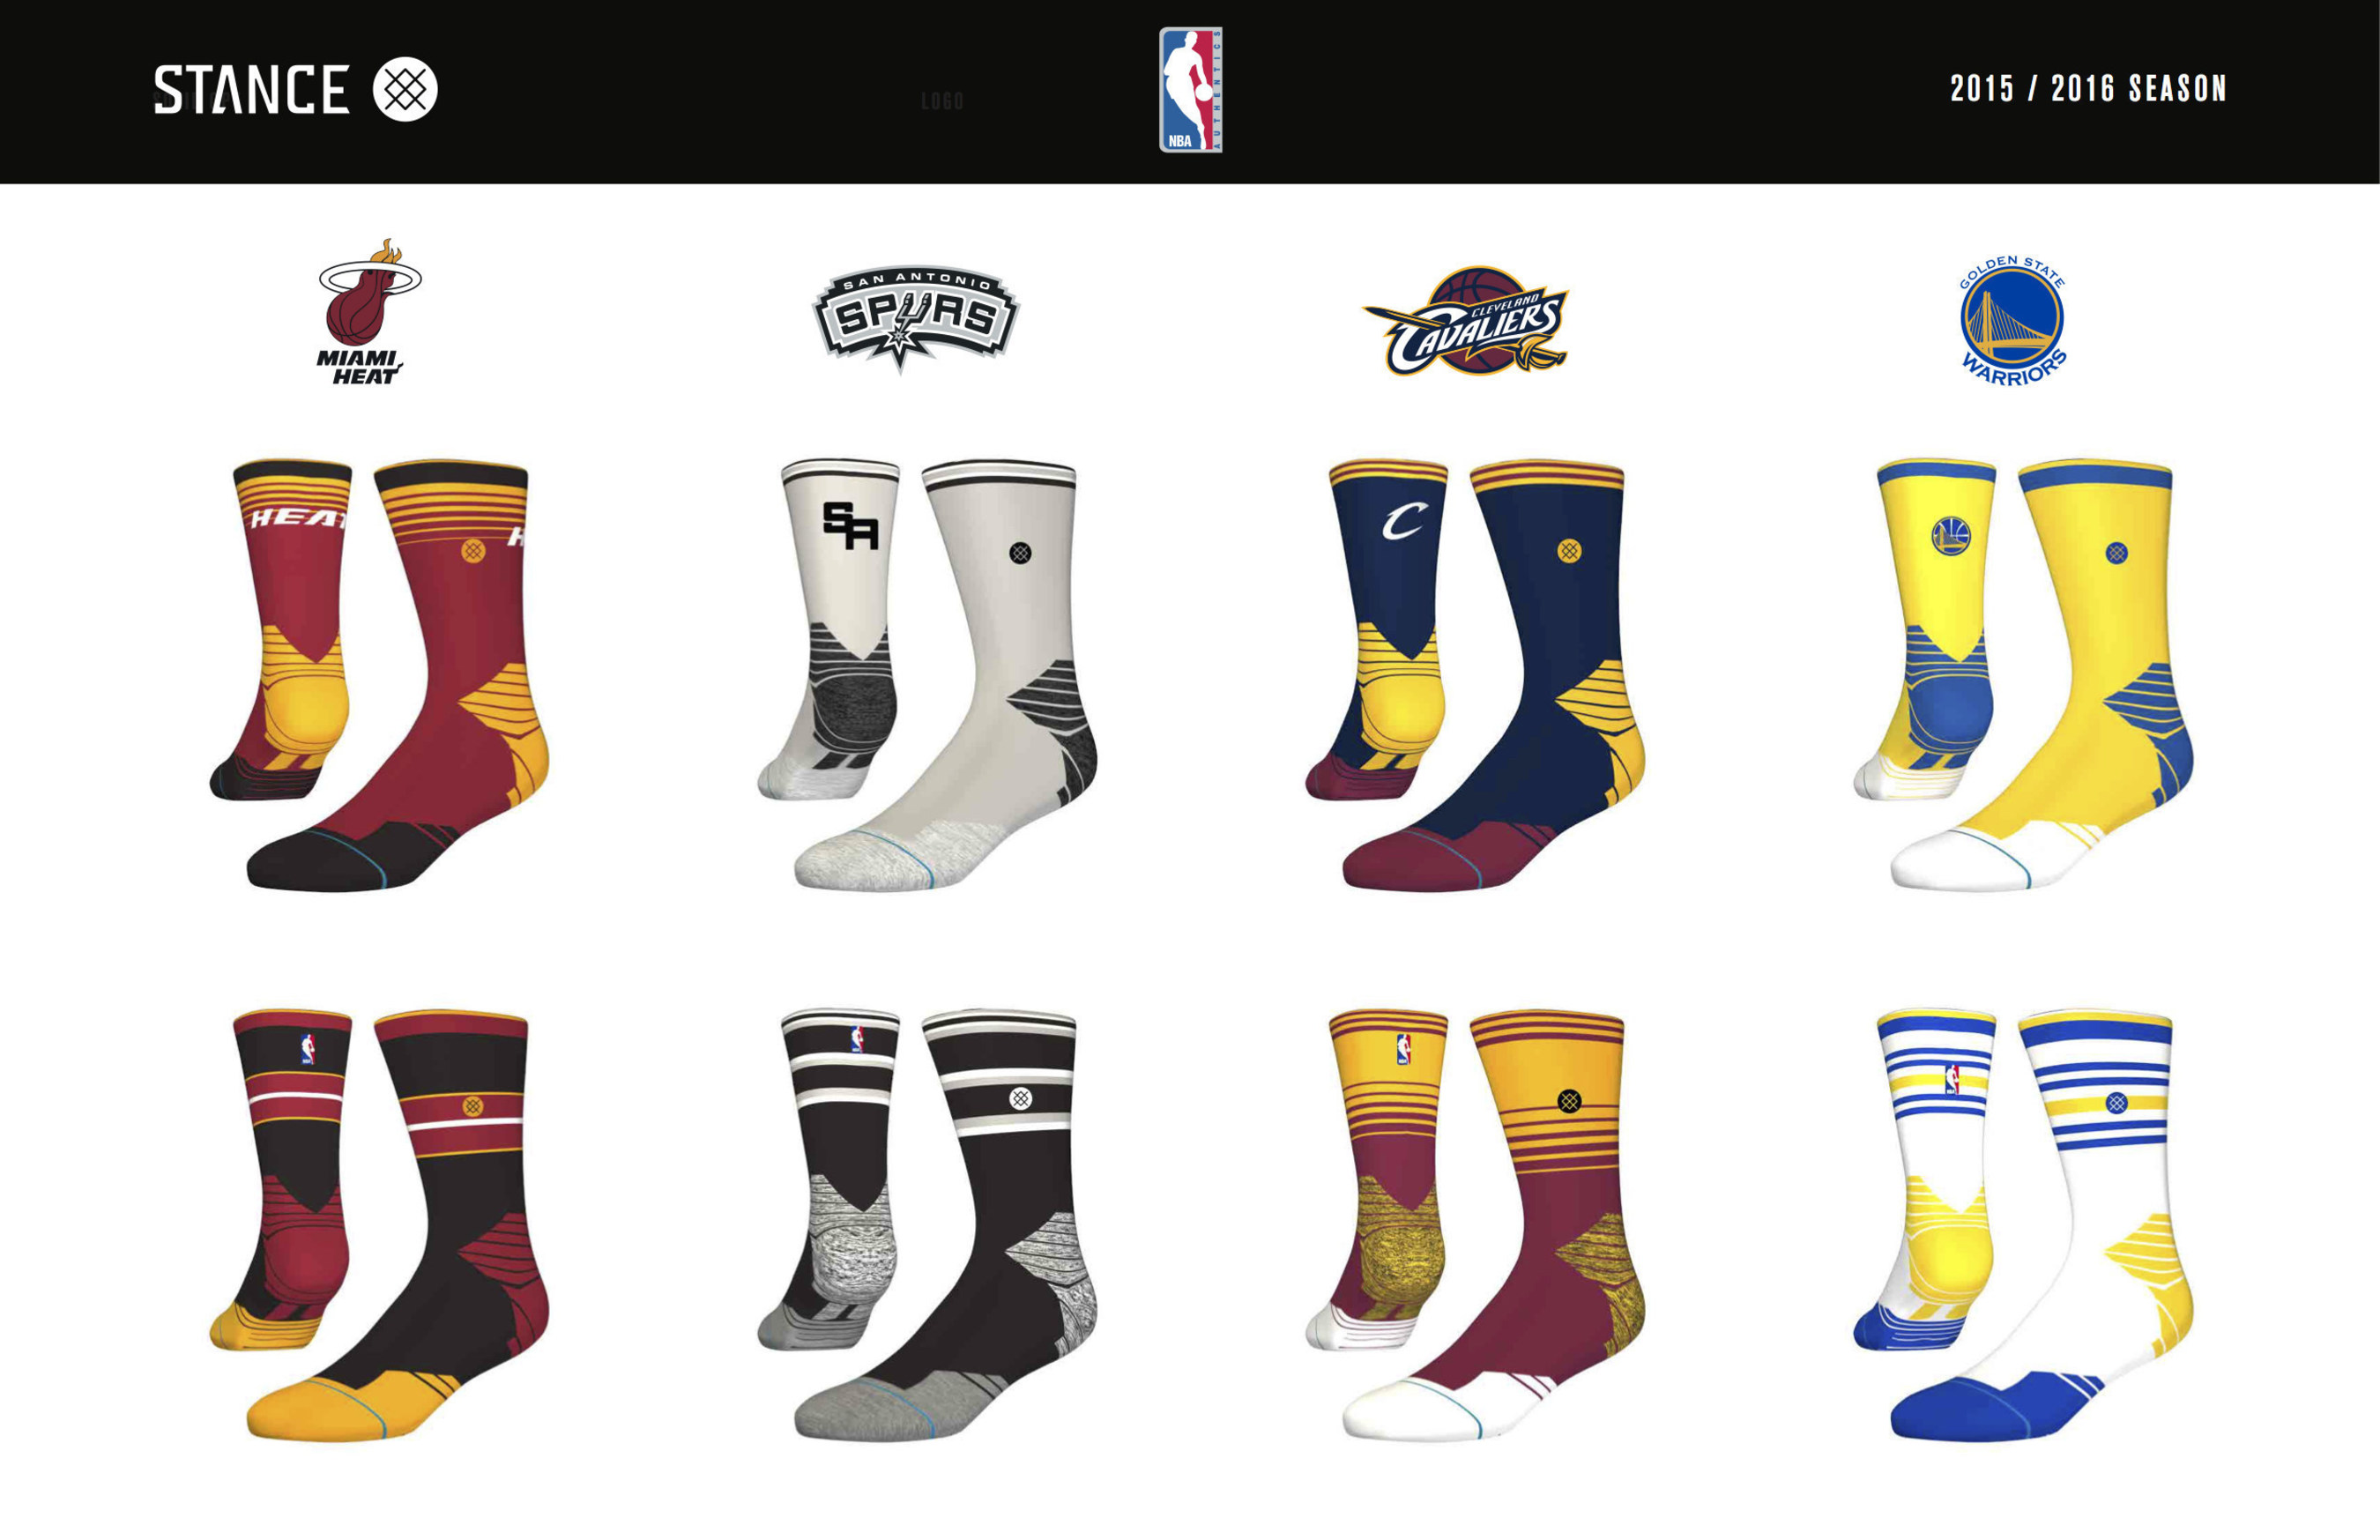 Stance the new official on-court sock provider of the NBA.